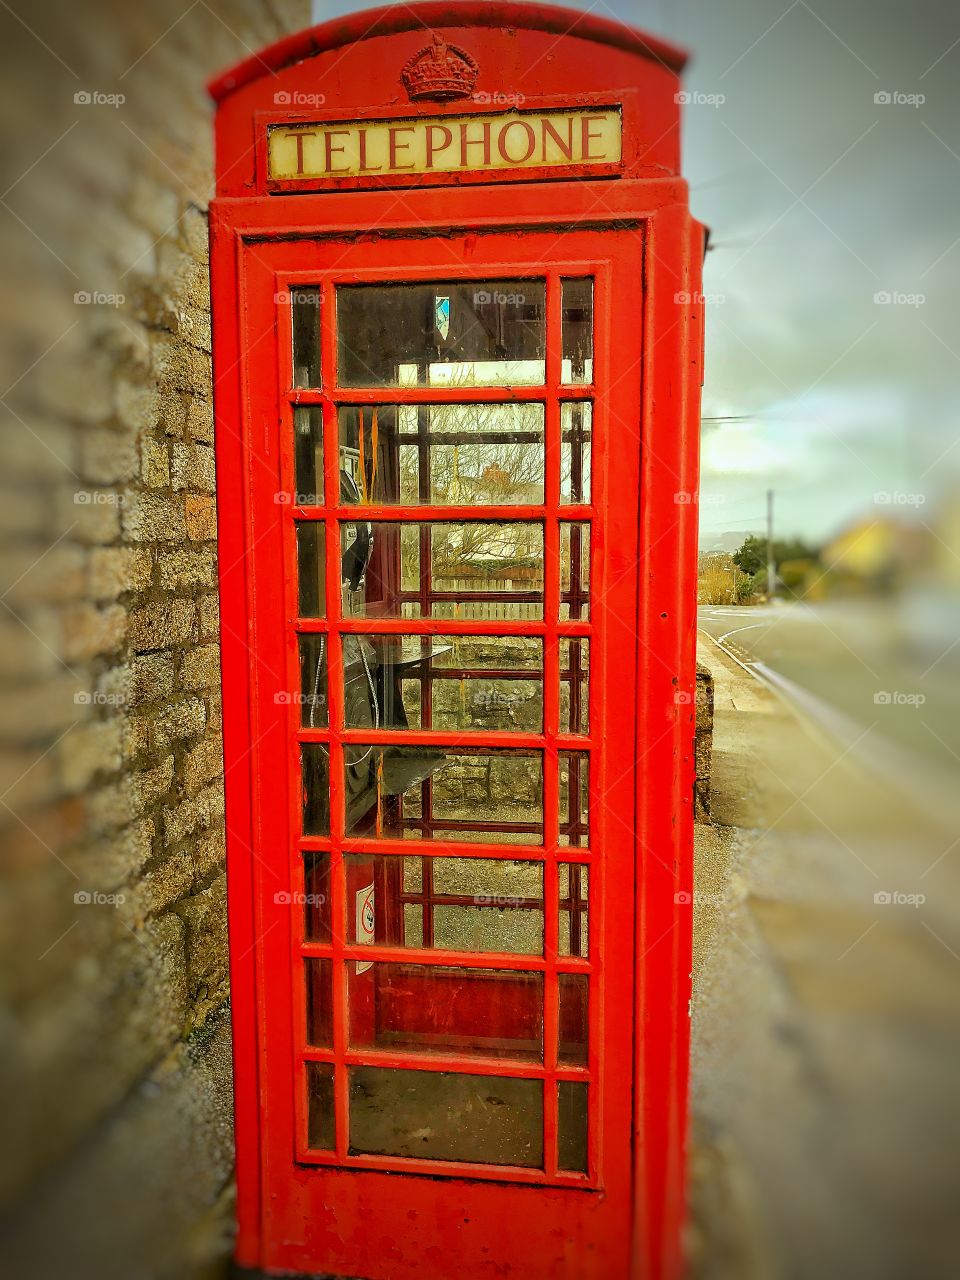 An old bright red telephone box